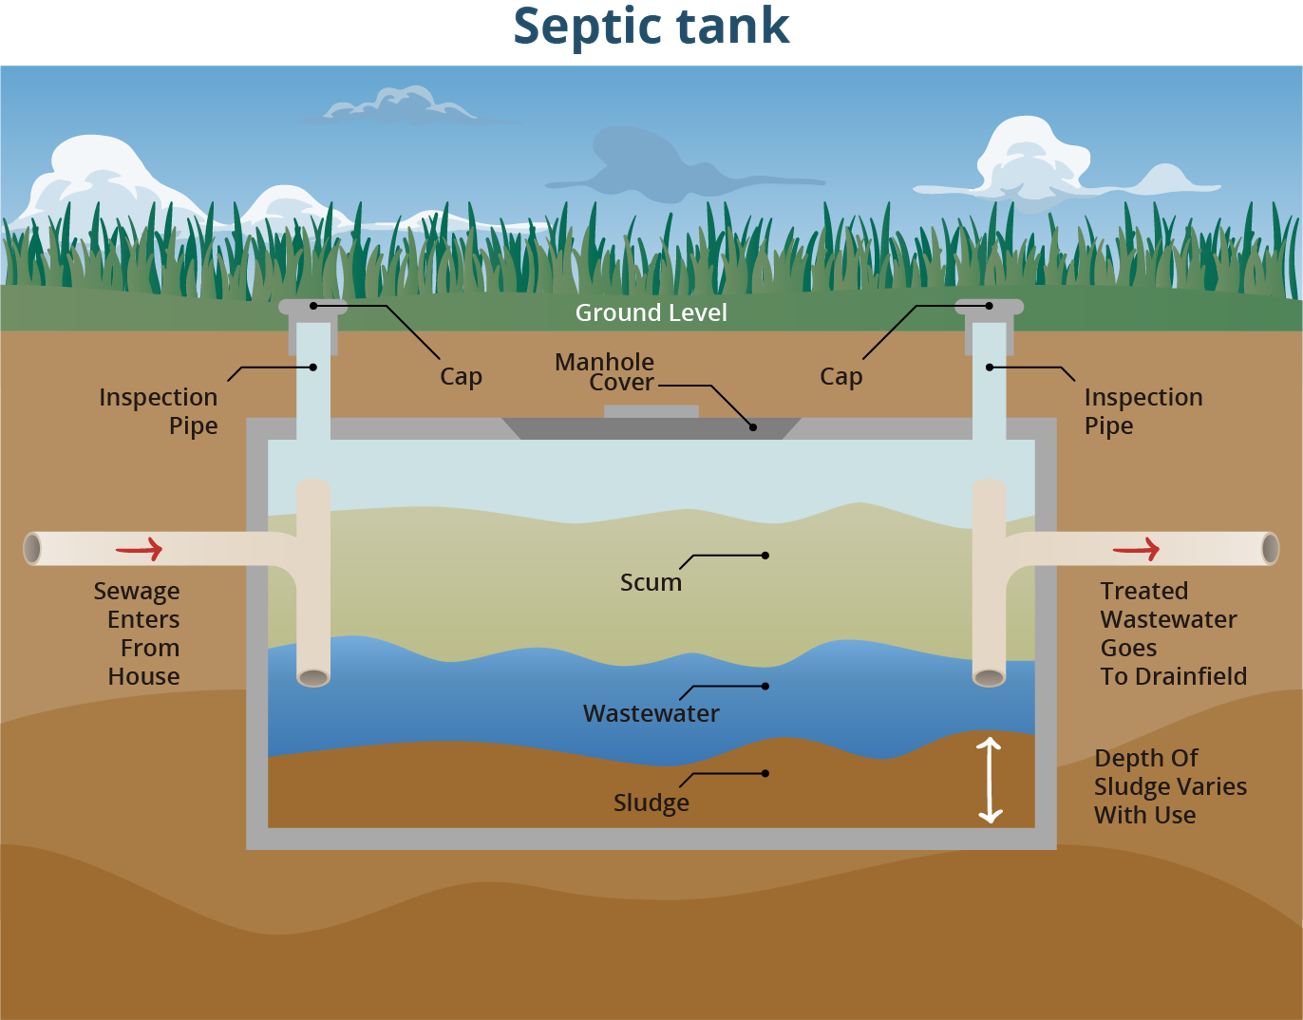 Maintaining your septic system: Should you use additives